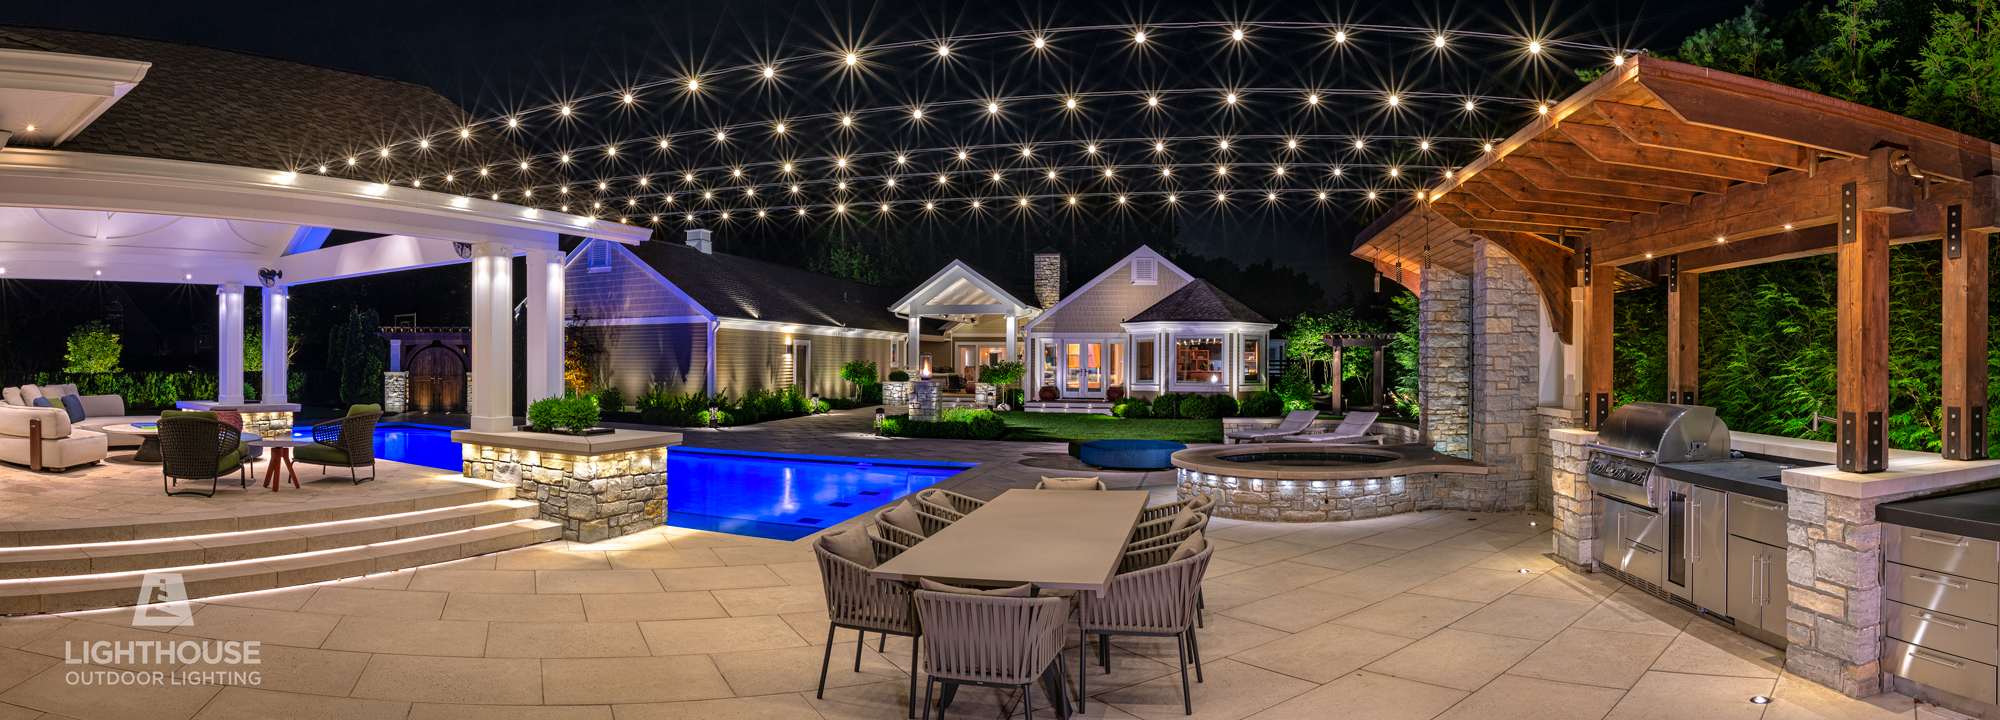 Patio String Lighting in Chesterbrook, PA